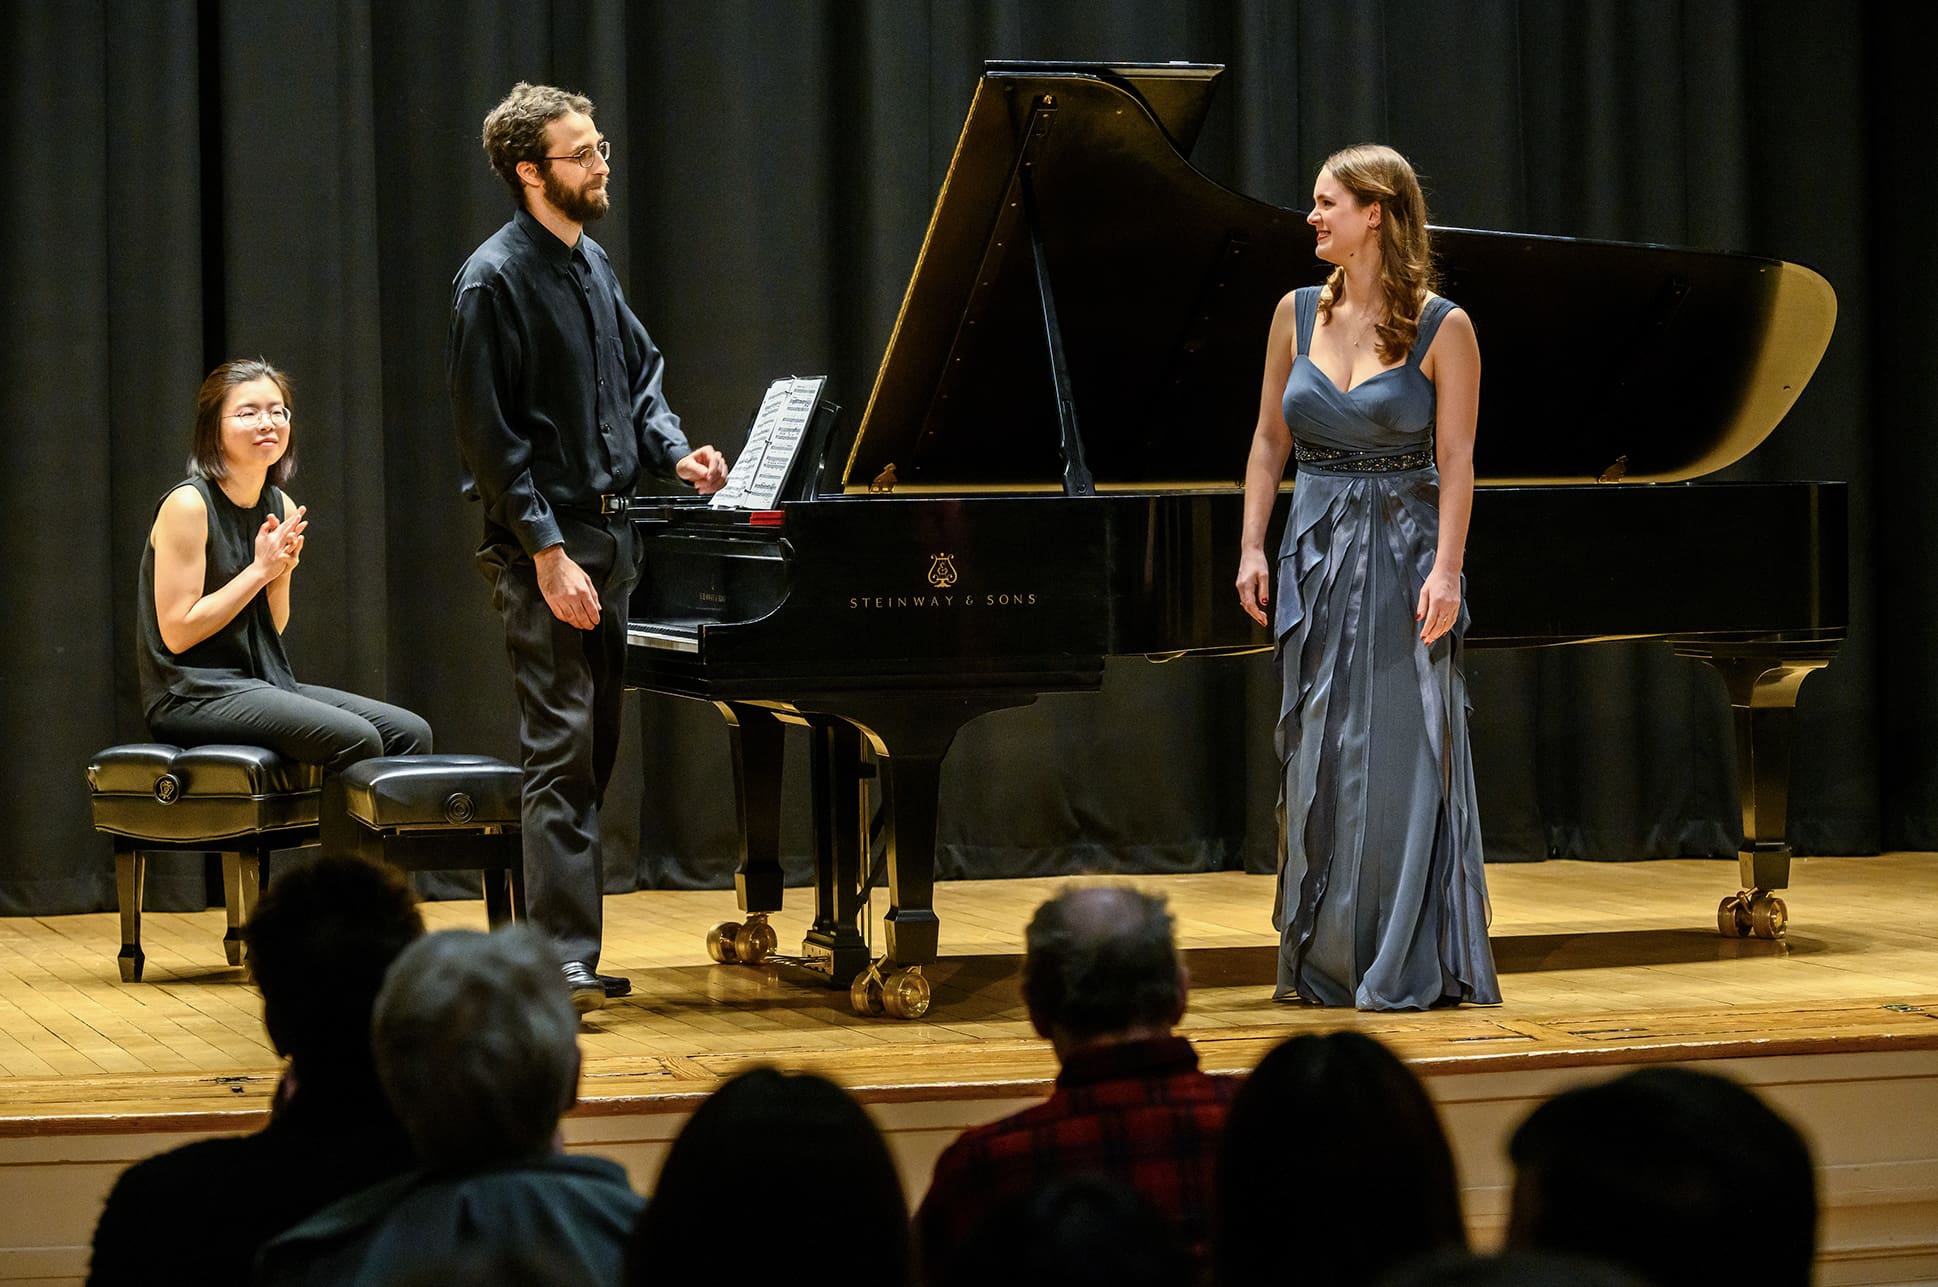 Soprano Emily Siar and pianist Elias Dagher bow after a performance in NEC's Williams Hall.